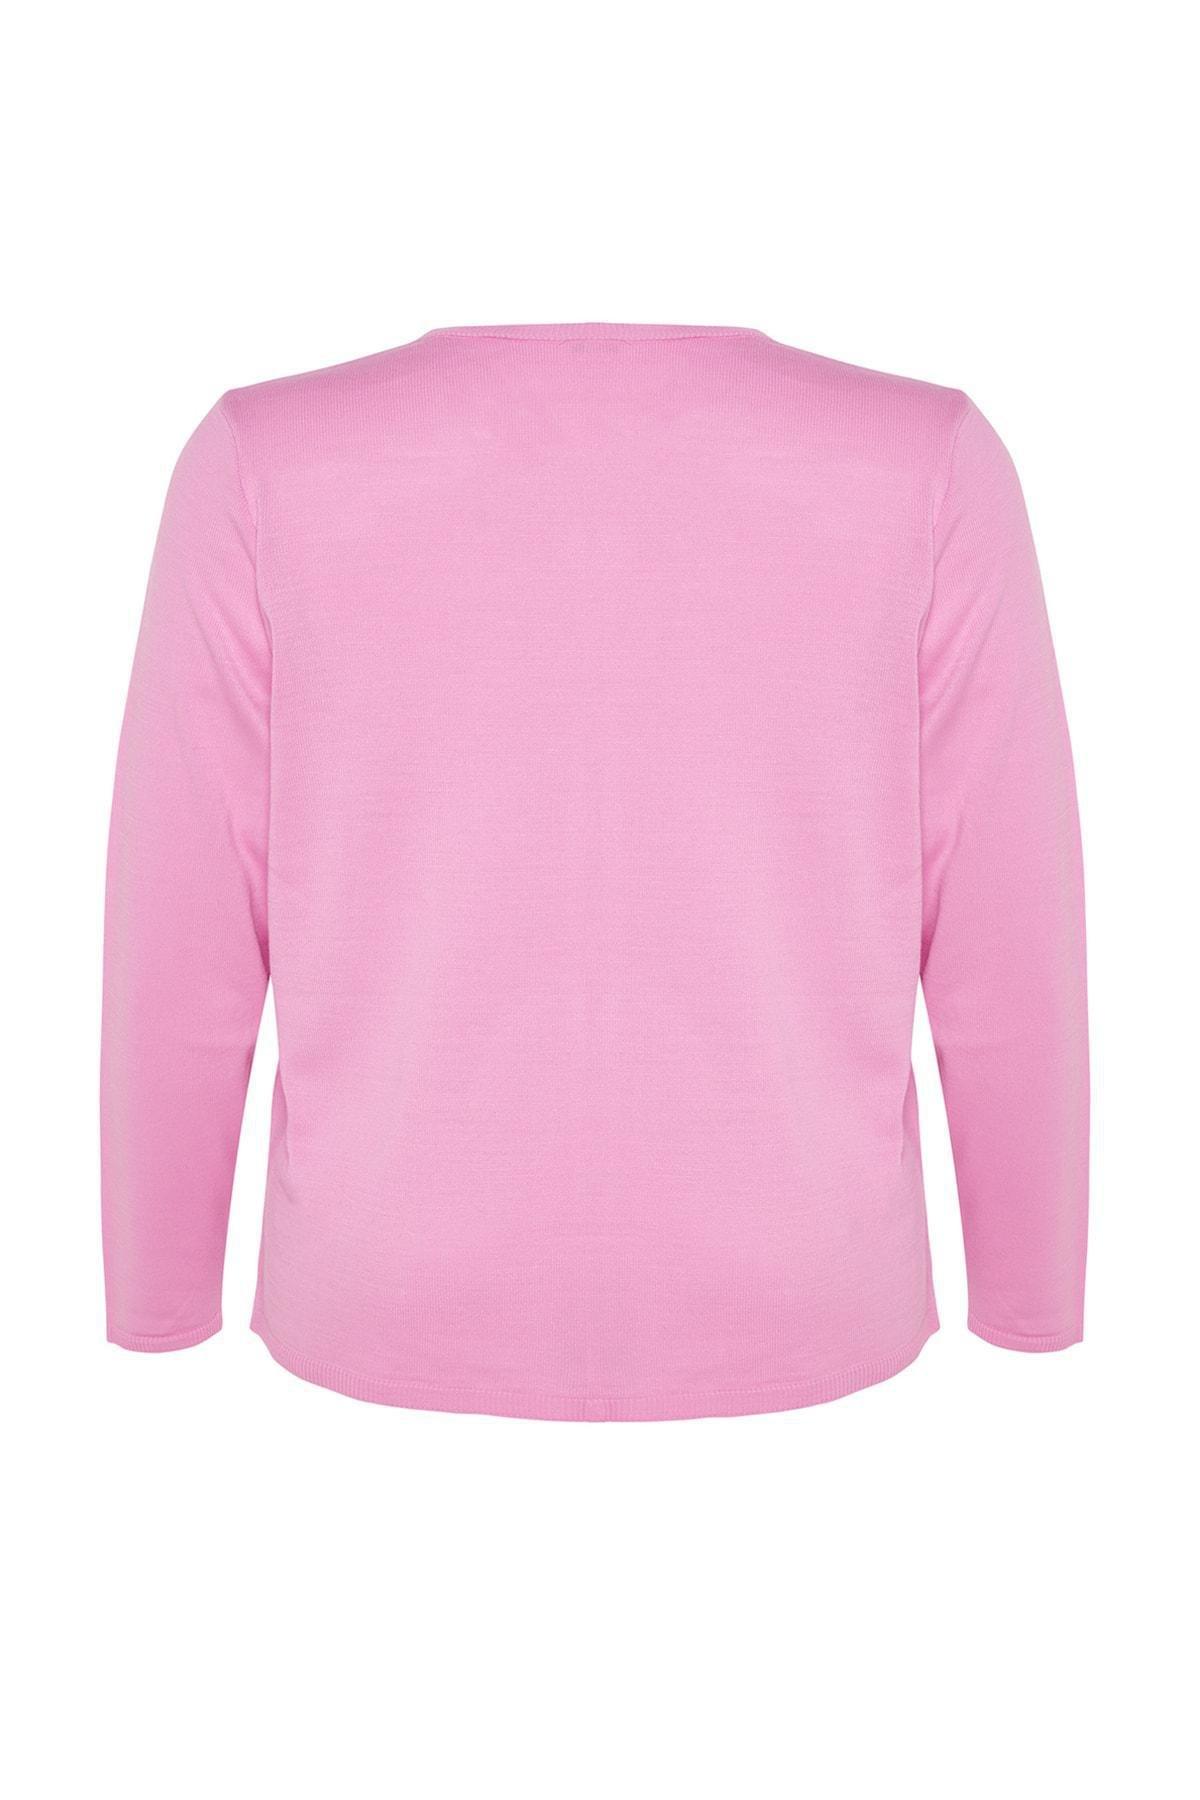 Trendyol - Pink Knitted Cardigan